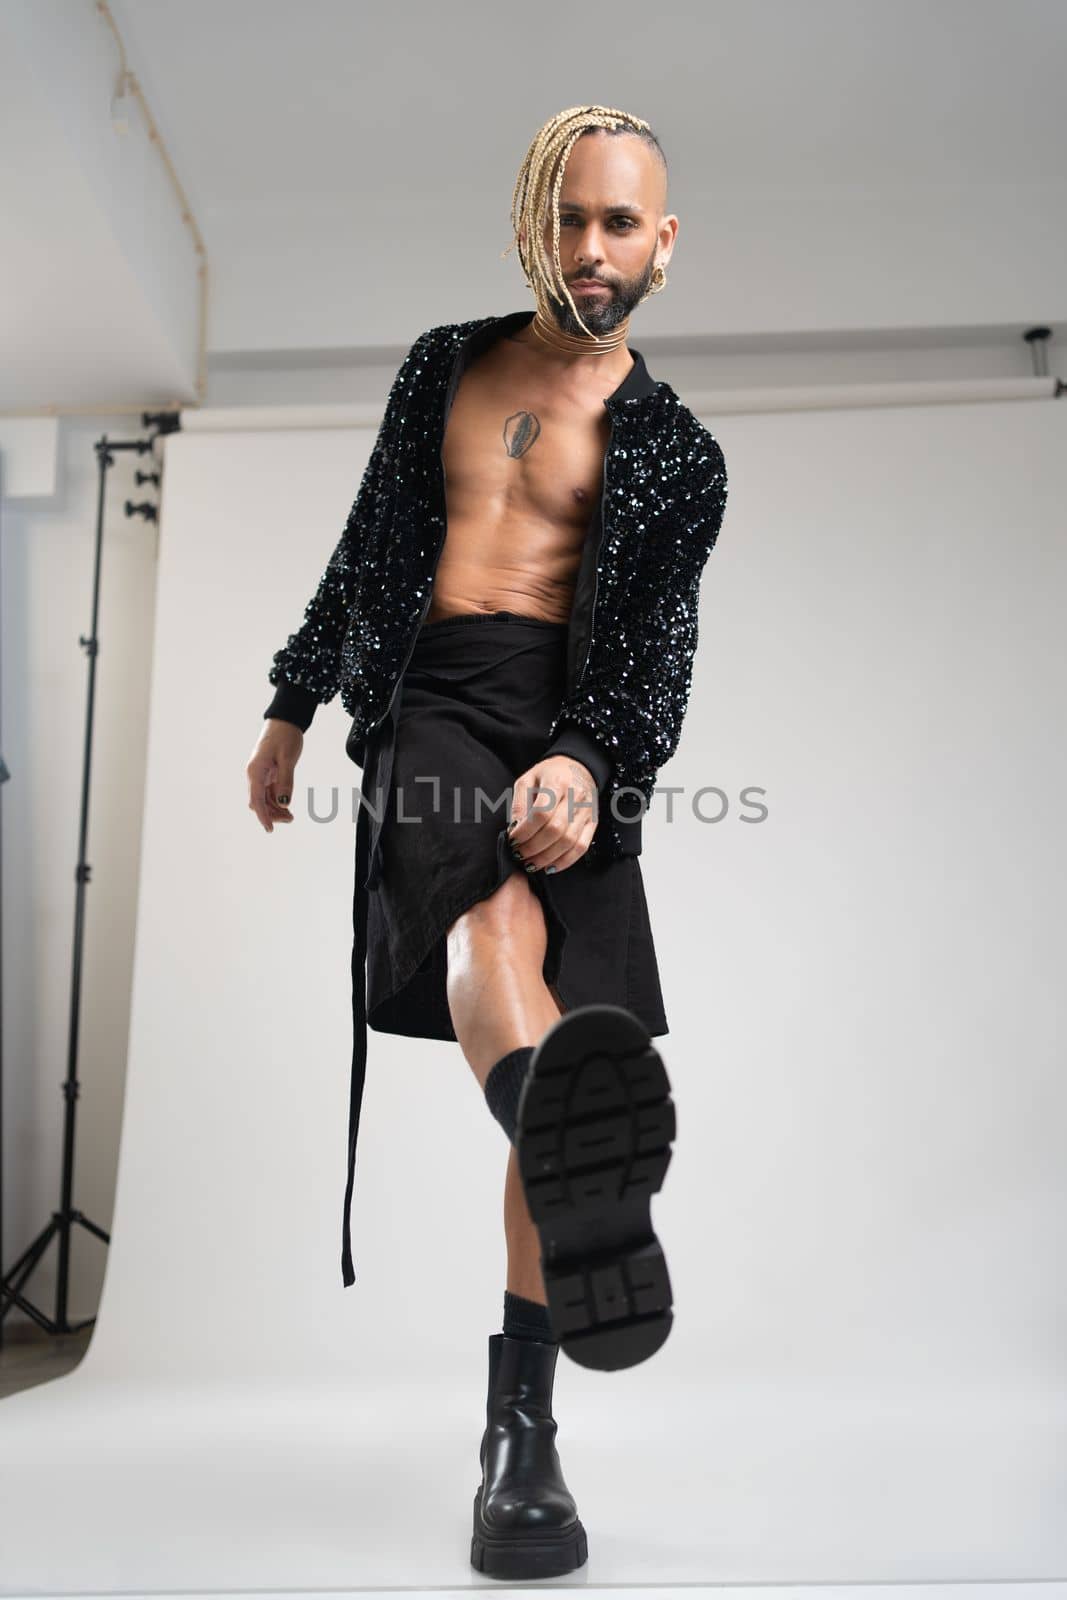 Full length gay man wearing women clothing dancing. Brazilian homosexual male wearing black skirt and boots posing in photo studio on white background. Bearded gay with make up. Vertical shoot